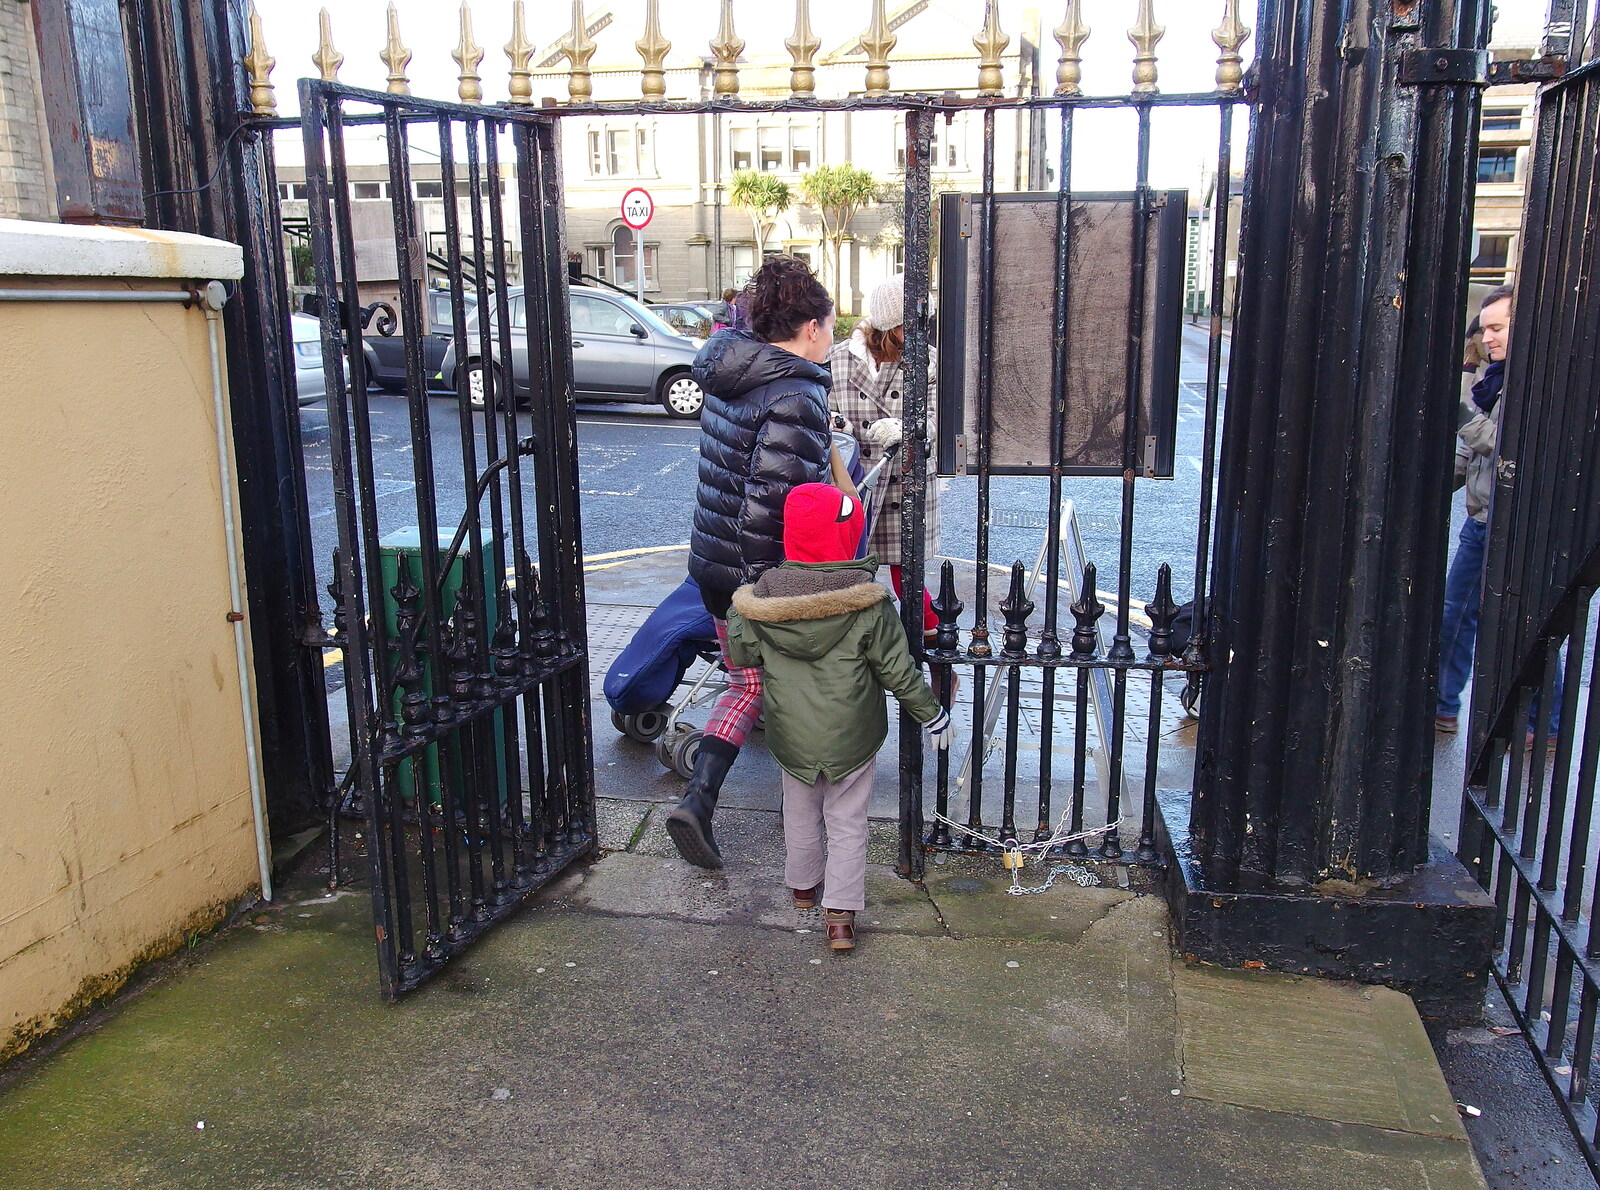 Evelyn and the gang head through an iron gate from Dun Laoghaire and an Electrical Disaster, Monkstown, County Dublin, Ireland - 4th January 2014